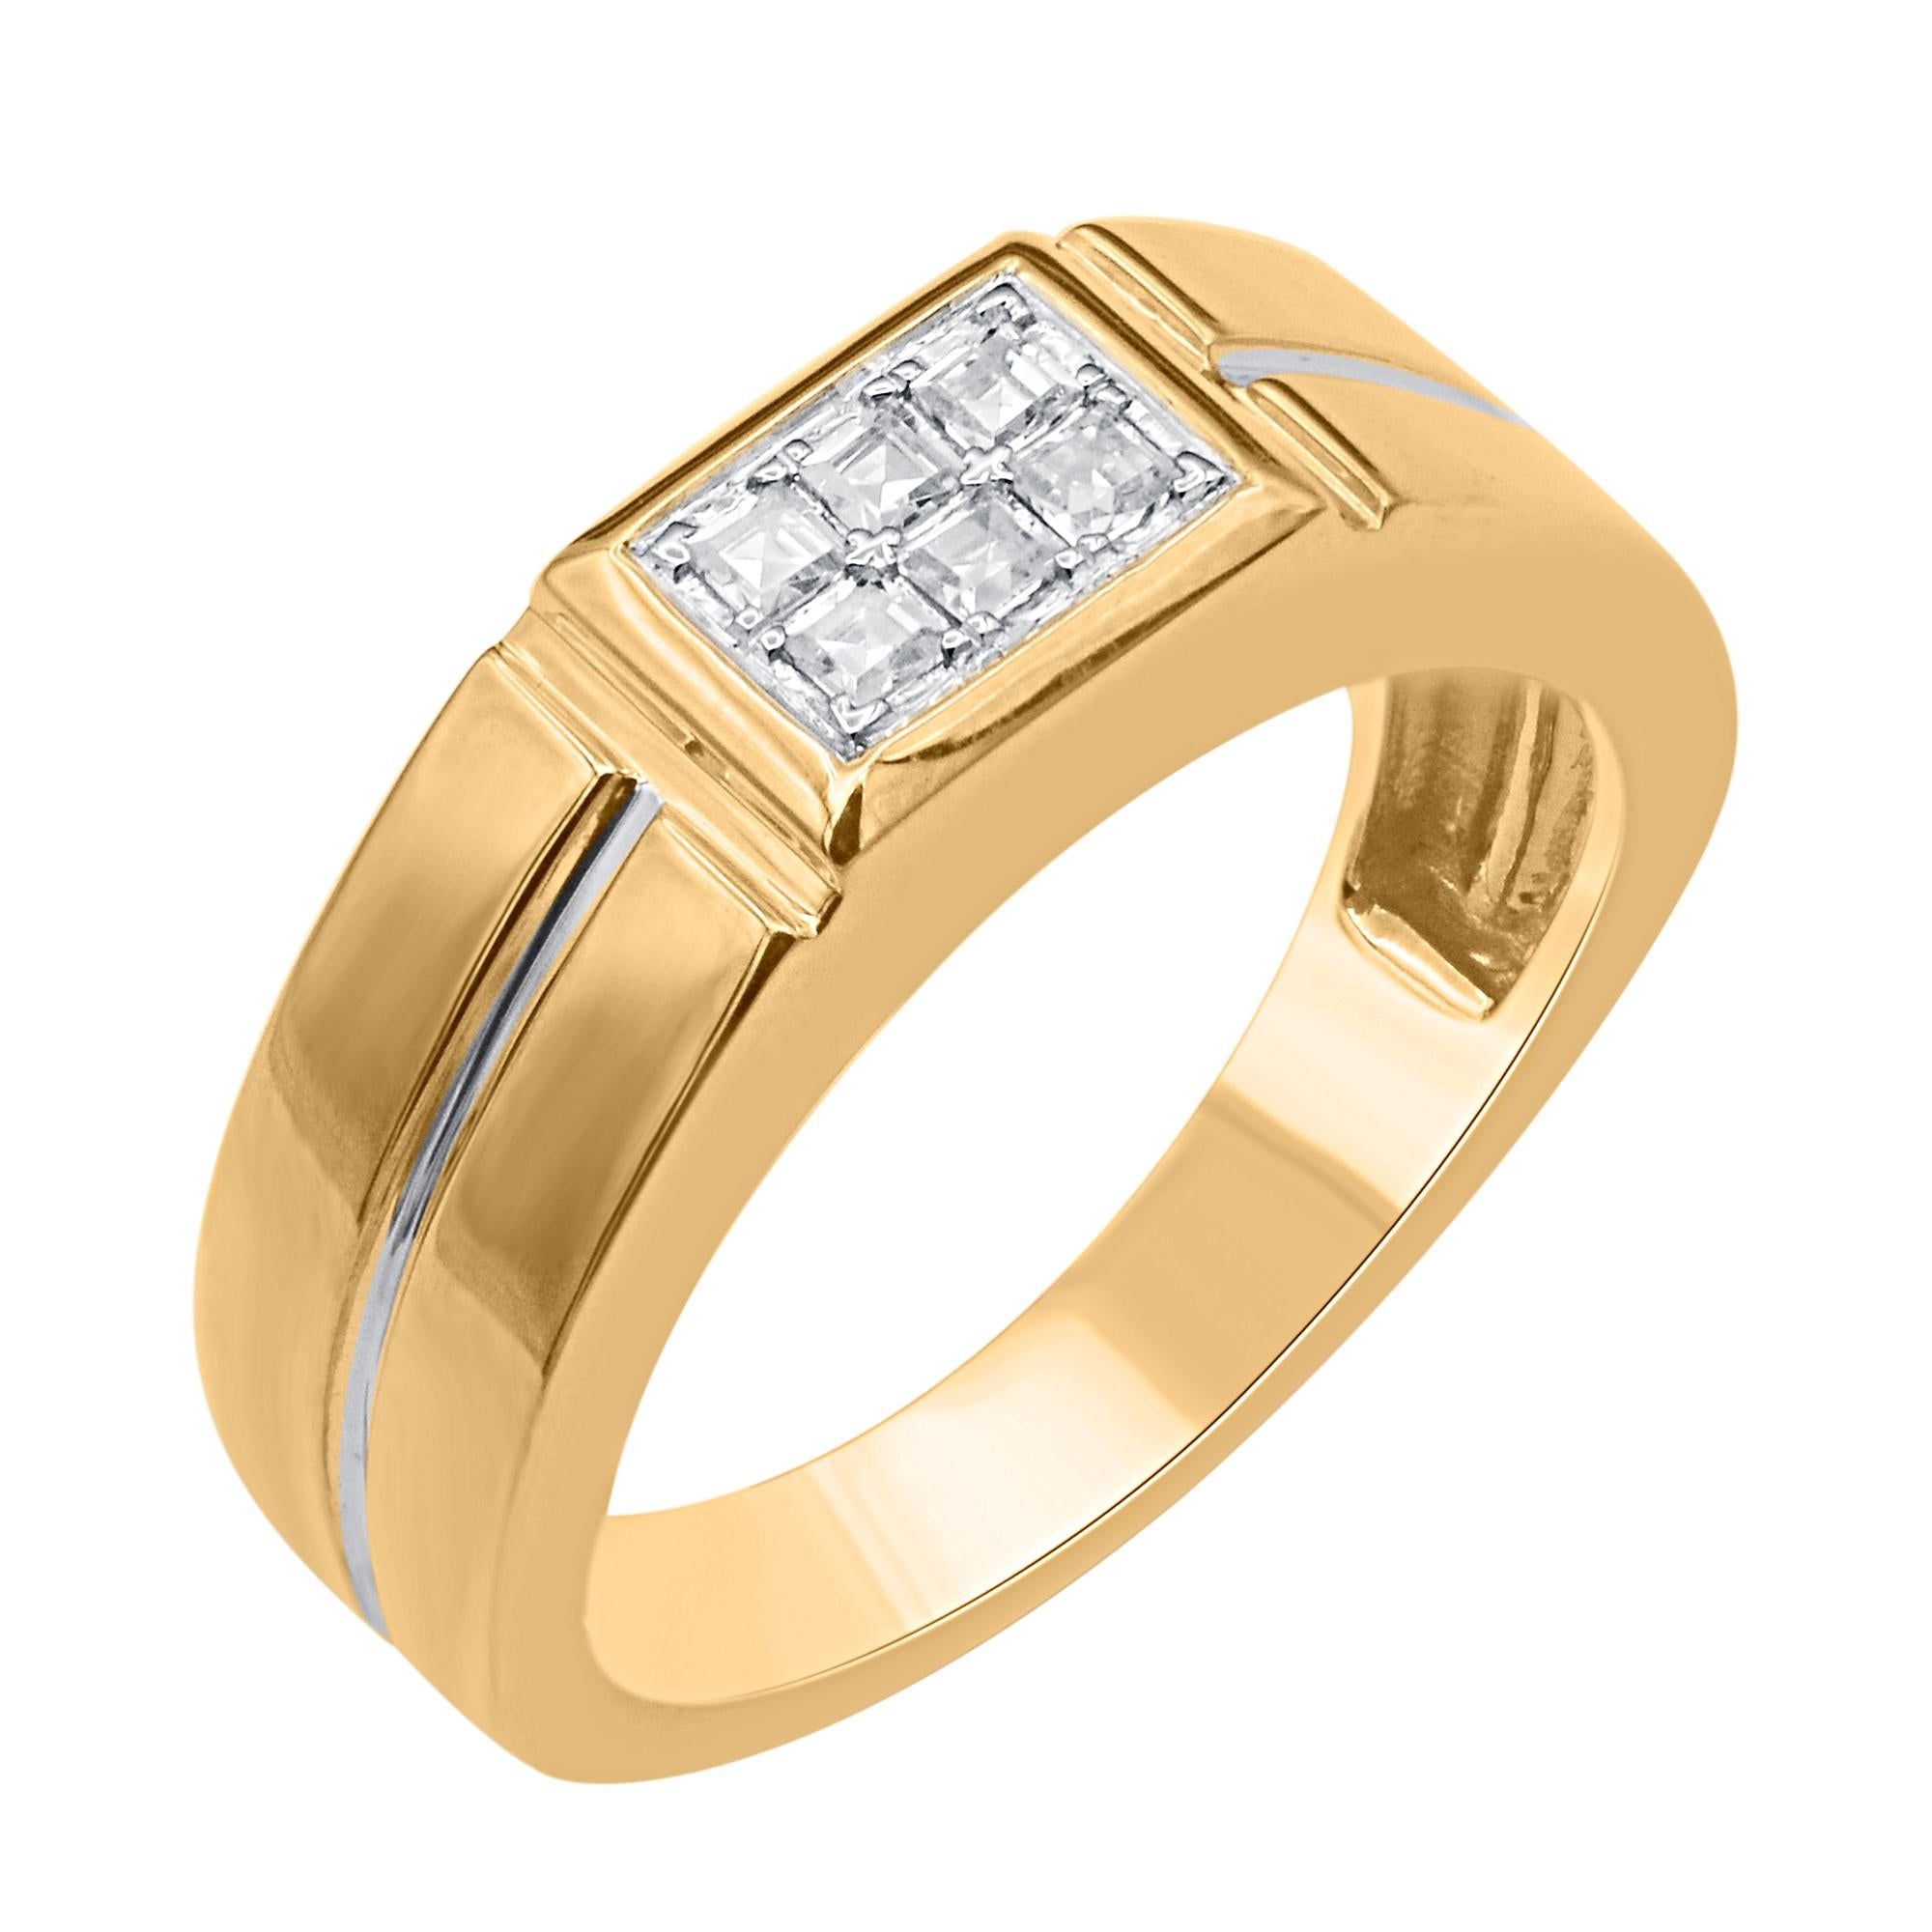 Celebrate your loving commitment with this princess-cut 6 stone natural diamond band. This band shines with 0.30 carat of diamonds in 18KT yellow Gold. The white diamonds are graded as H-I color and I-2 clarity.